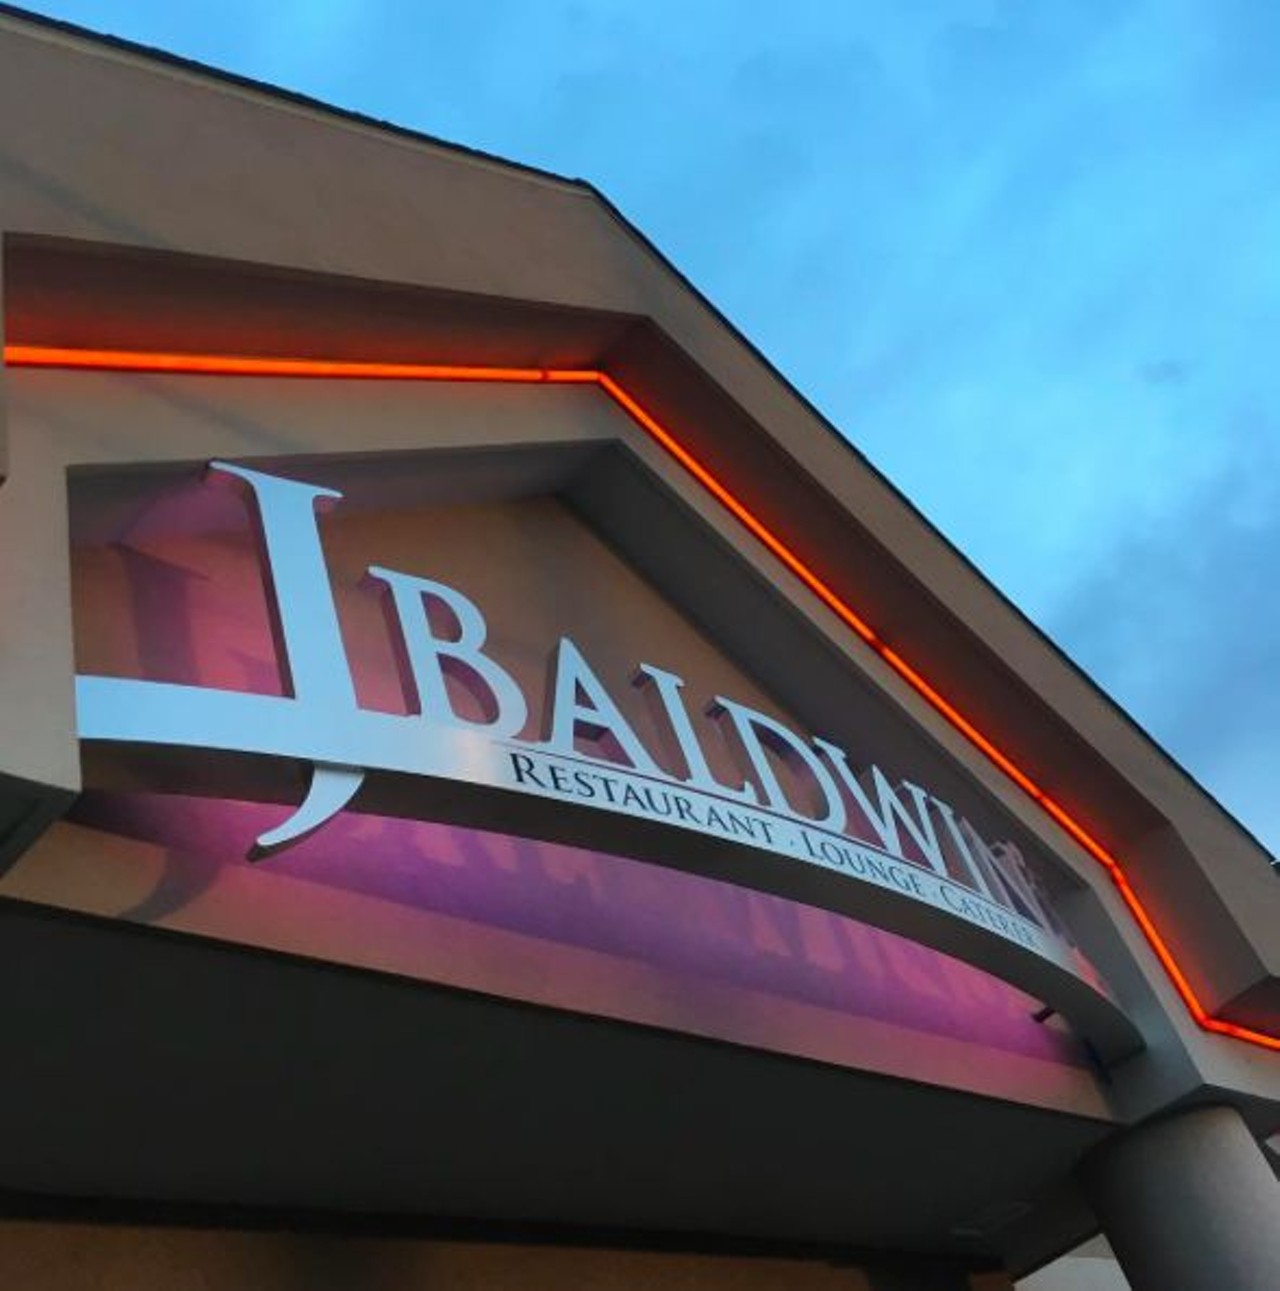 J. Baldwin's
16981 18 Mile Rd., Clinton Township, MI 48038- 586-416-3500
Voted best American Restaurant in 2016 by Local 4&#146;s Vote for the Best. J. Baldwins offers an upscale dining experience for a night out on the town. On Wednesday nights, bottles of wine are half off with the purchase of two entrees.
(Photo via IG account @luvmelane)